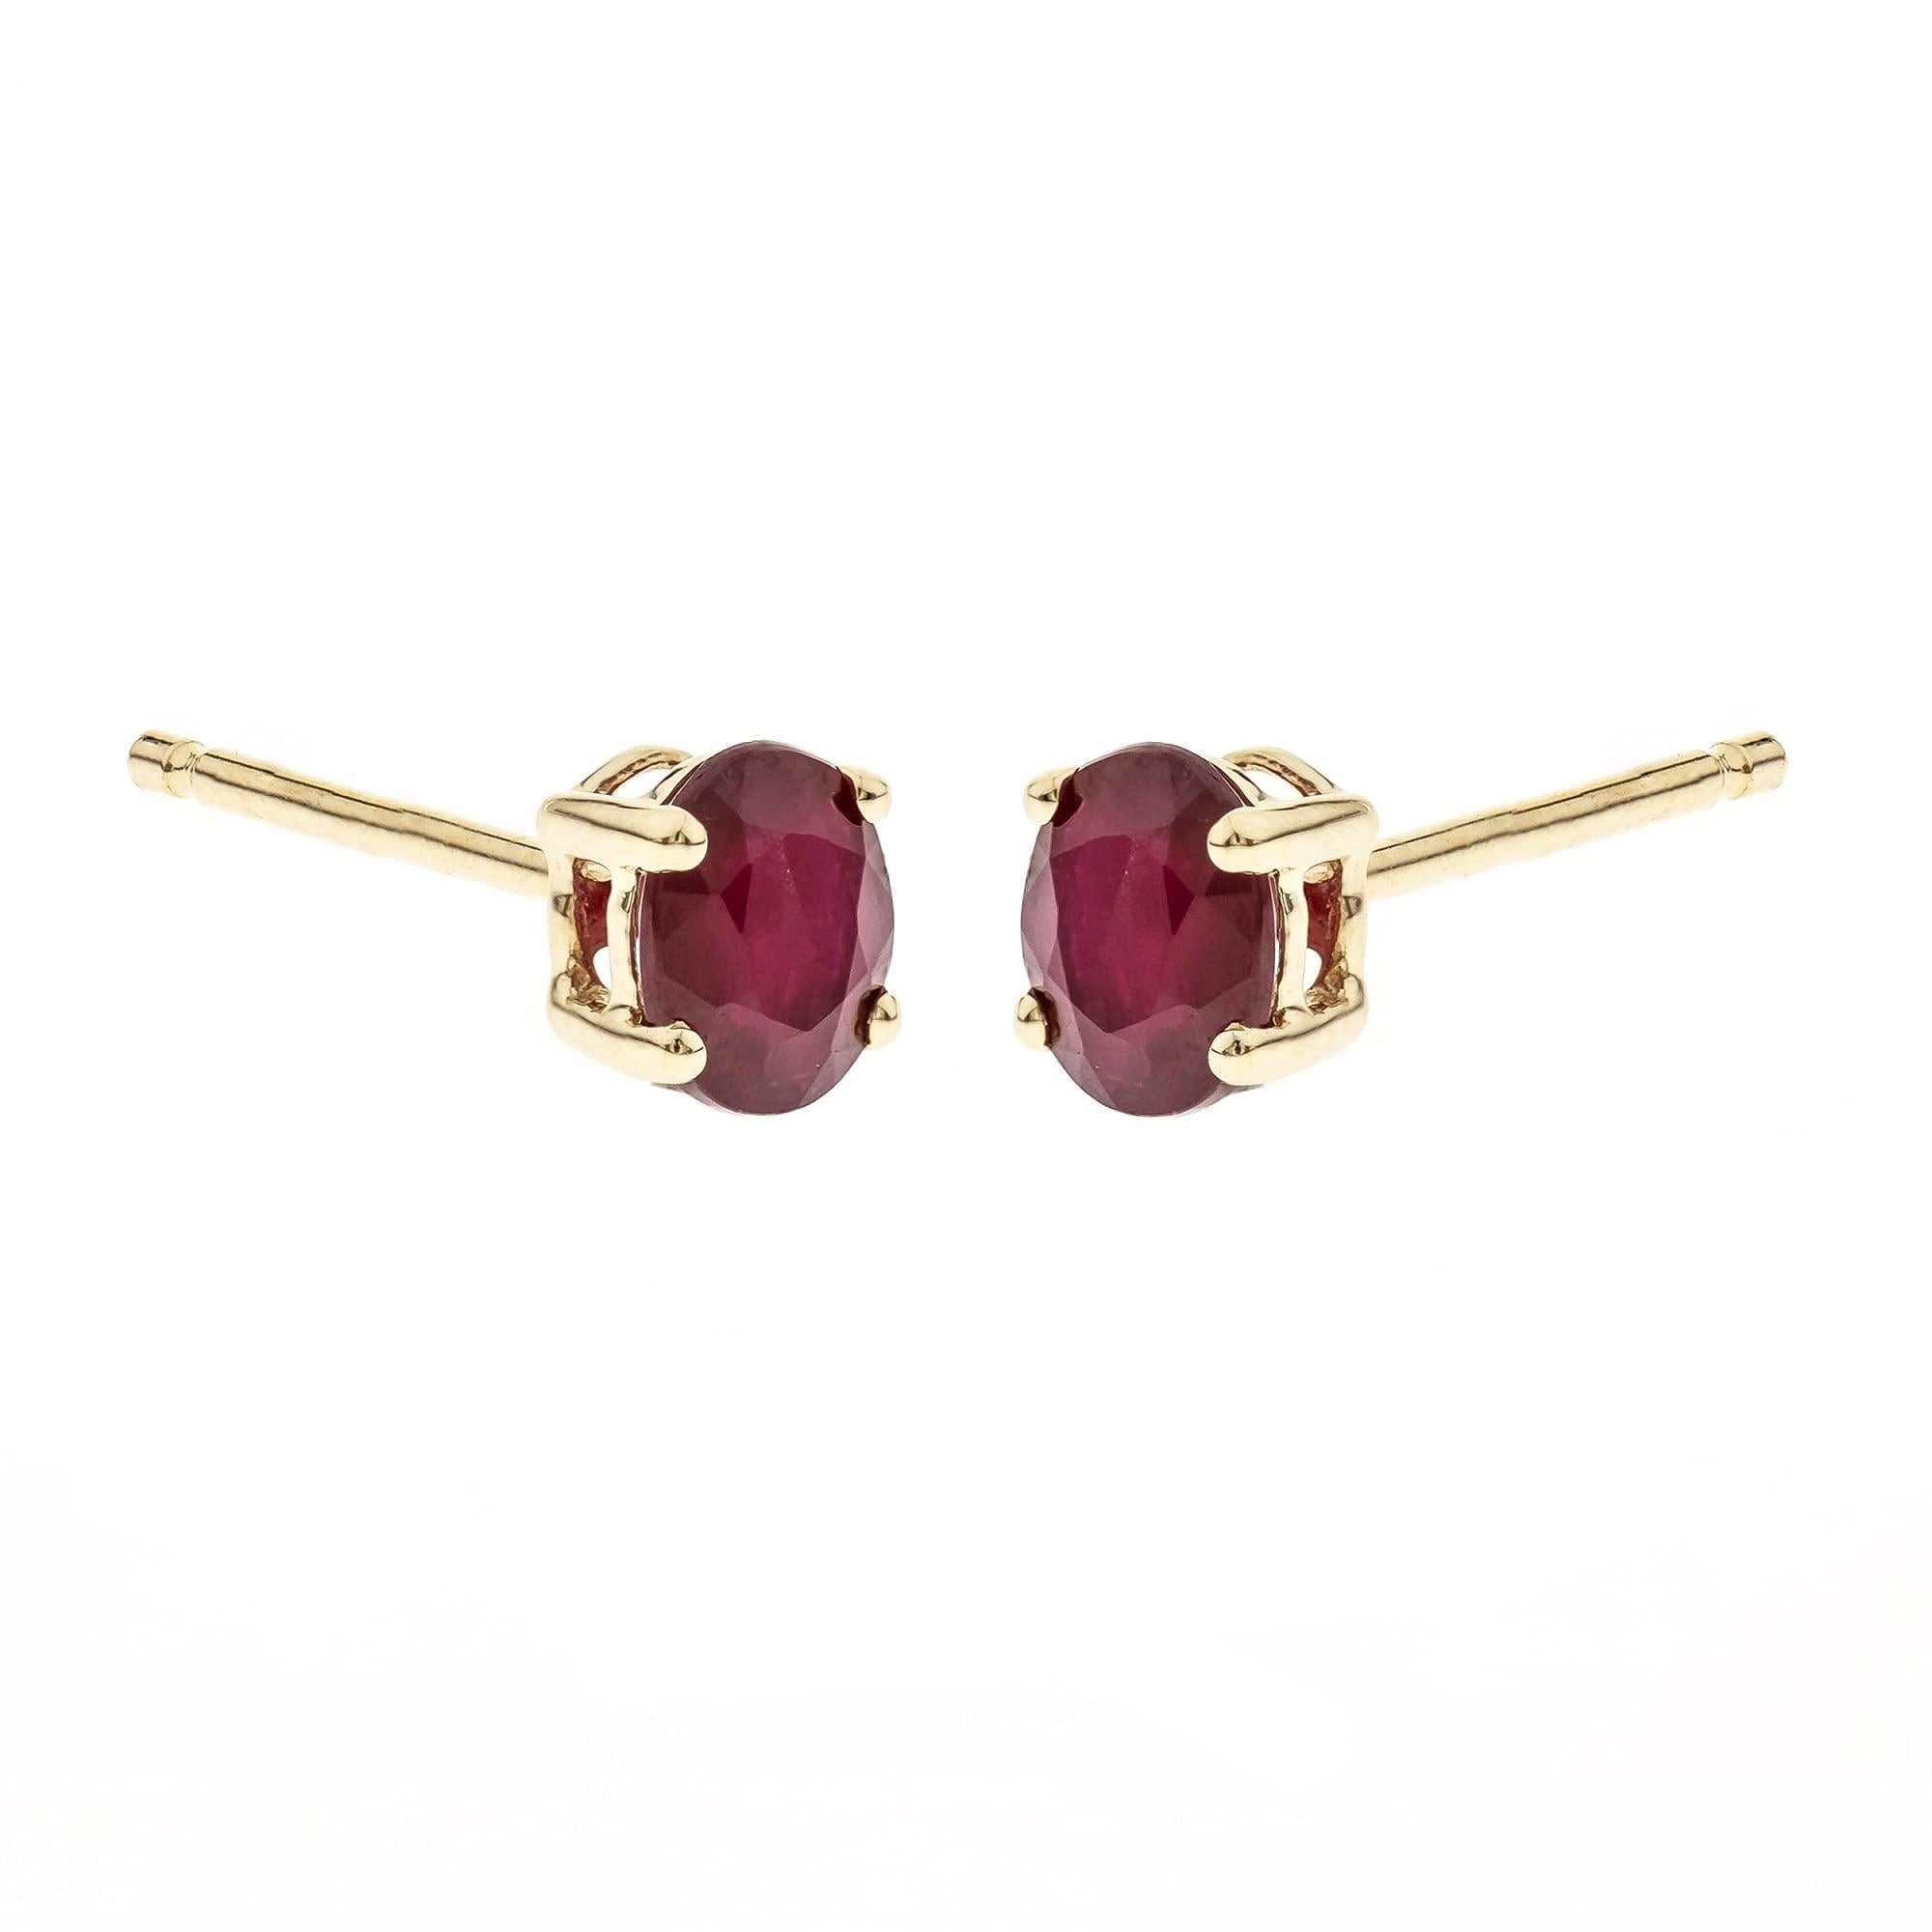 Each of these earrings features a single oval-cut Thai ruby gemstone in a four-prong setting. Style: Stud Gemstone colors: Pink Gemstone shapes: Oval Two prong-set oval-cut Thai rubies each measure 4 mm wide and 5 mm long Total gemstone weight: 7/8